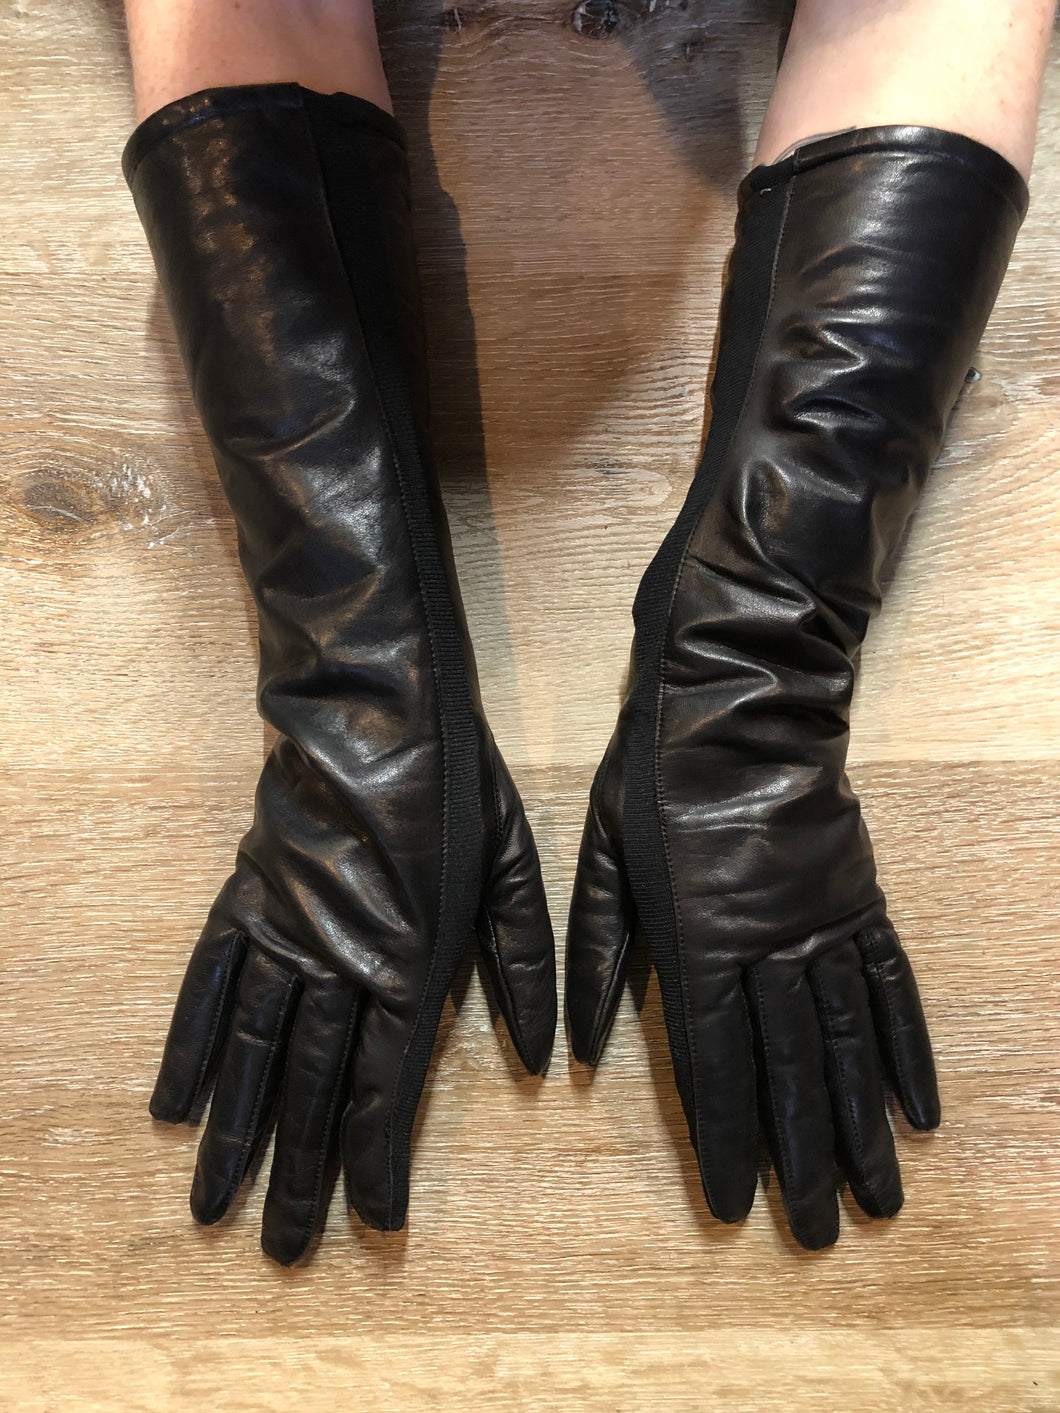 Kingspier Vintage - Black leather three-quarter length gloves feature a lining and a stretchy section for comfort. Size small/ 8.